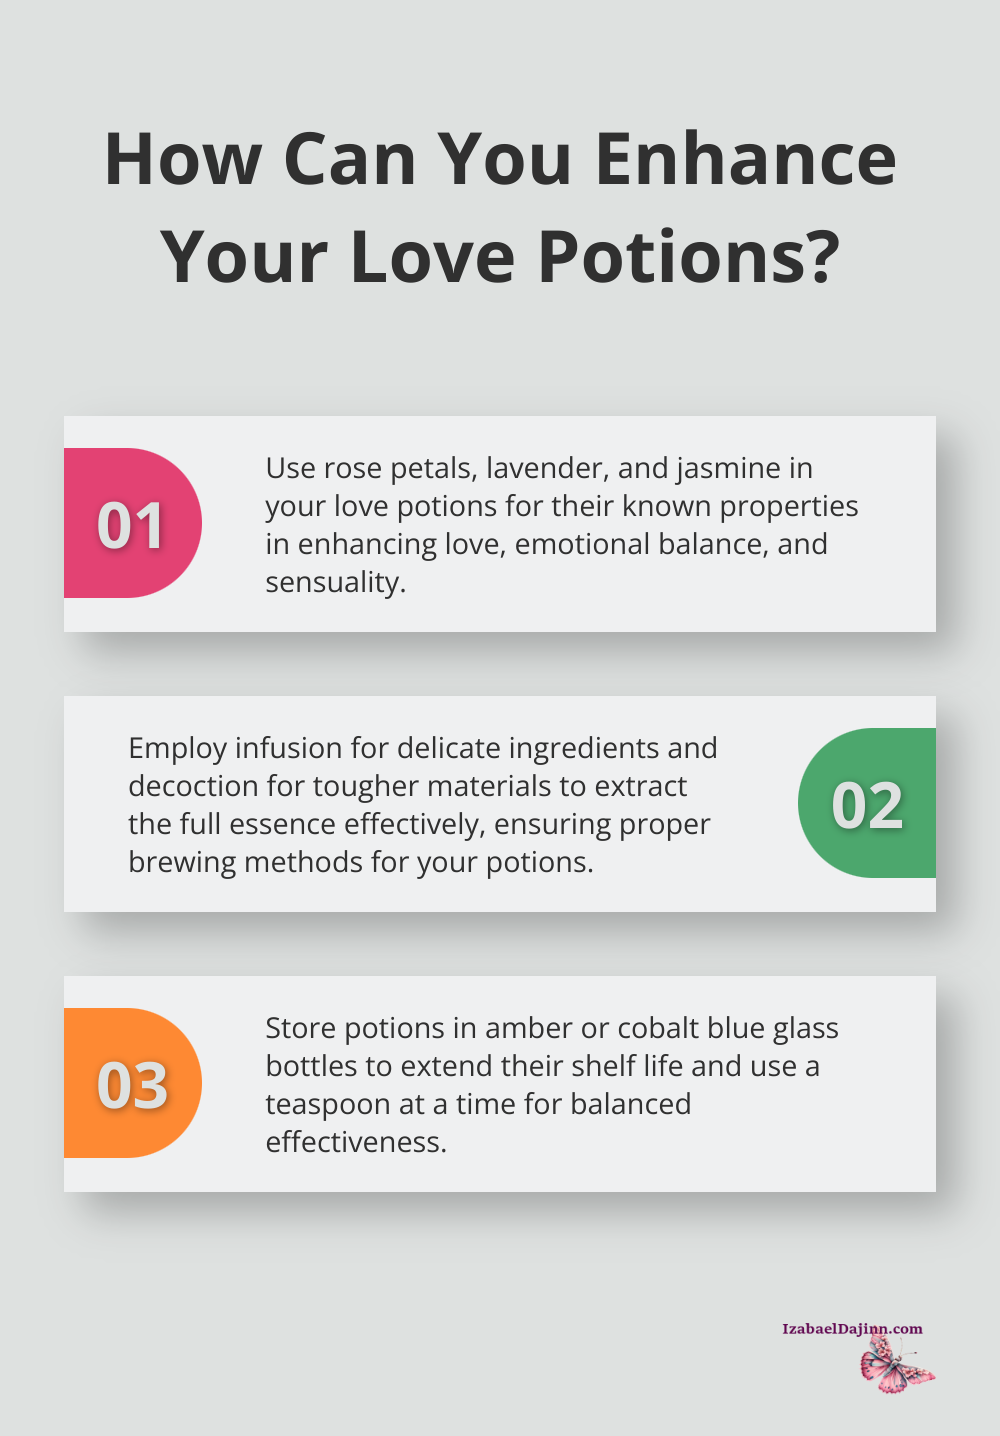 Fact - How Can You Enhance Your Love Potions?